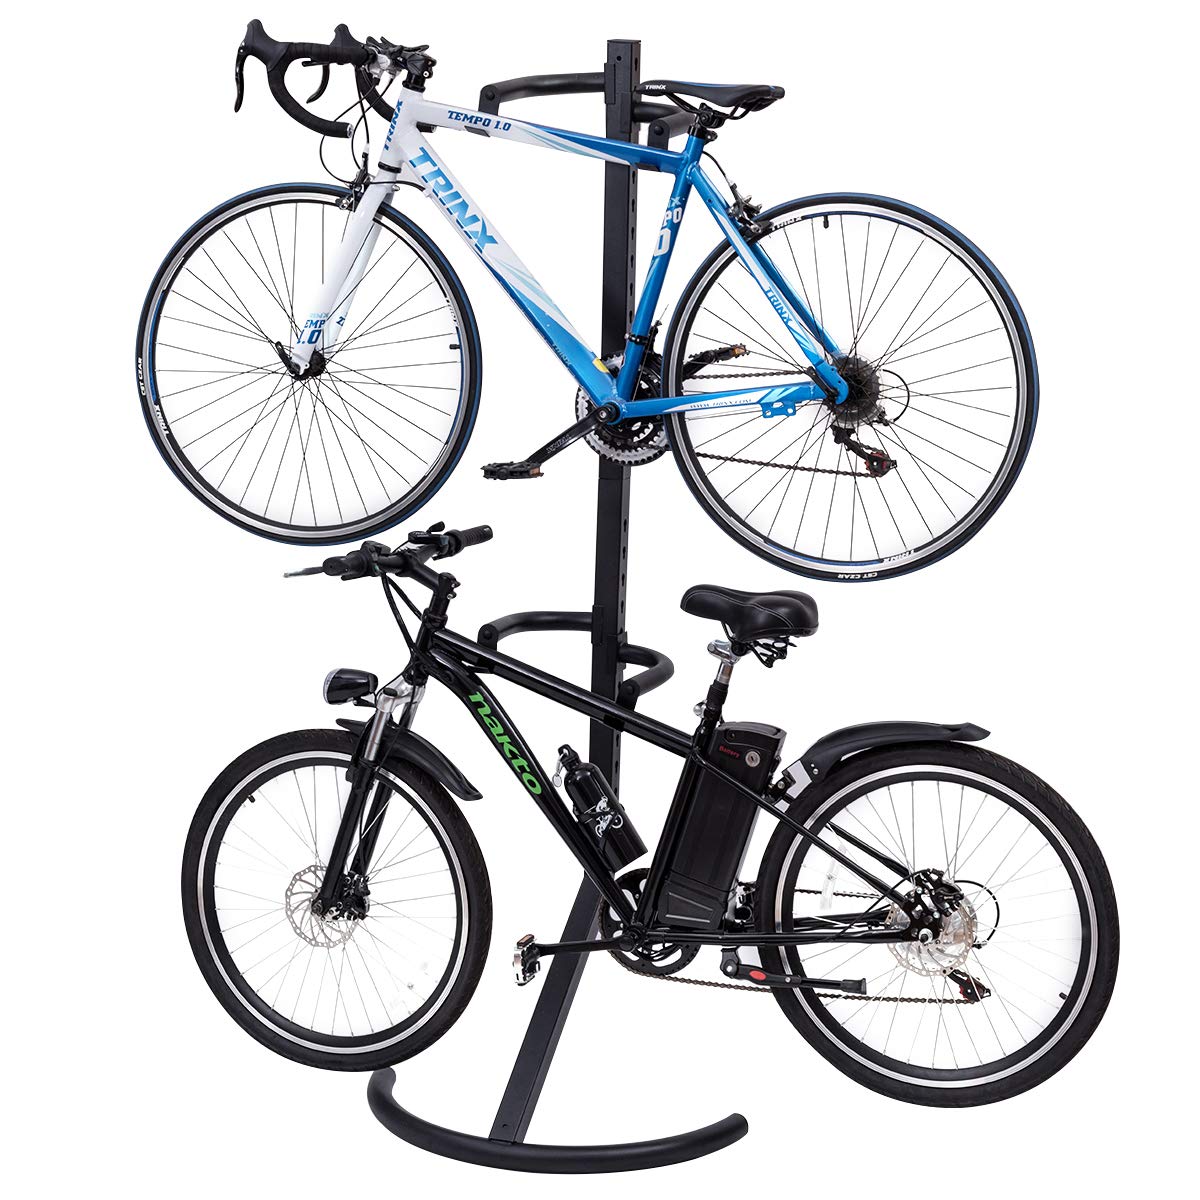 bikes with rack stand